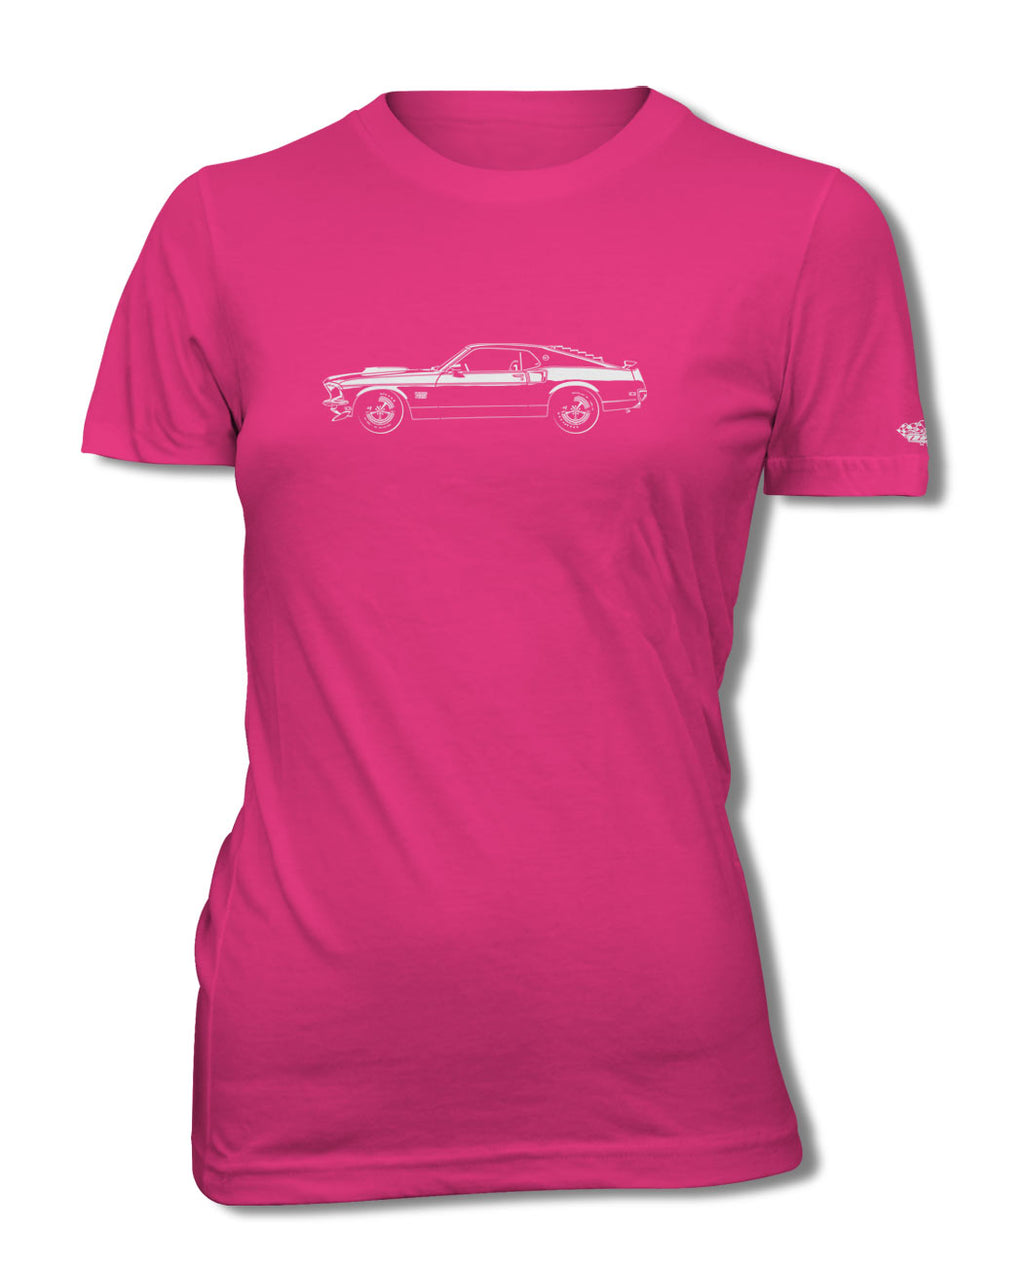 1969 Ford Mustang BOSS 429 Fastback with Spoiler & Shades T-Shirt - Women - Side View